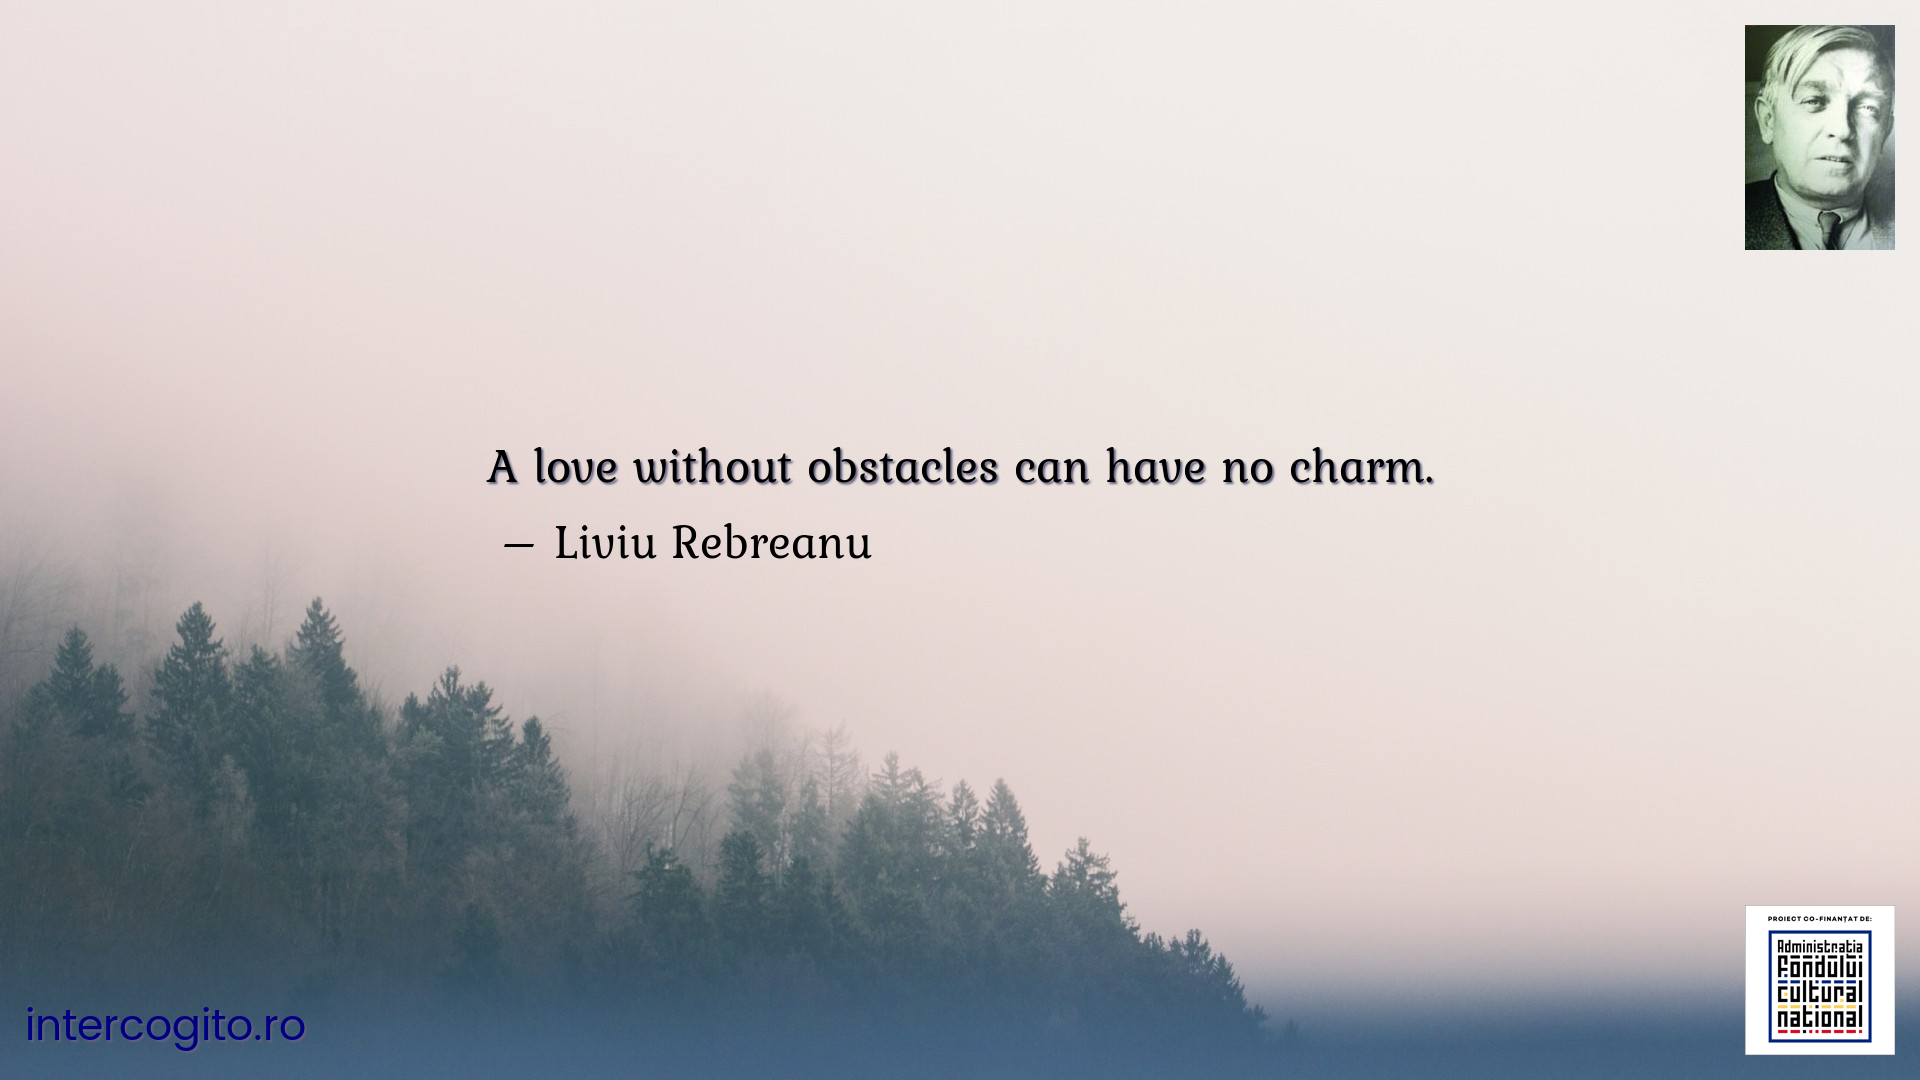 A love without obstacles can have no charm.